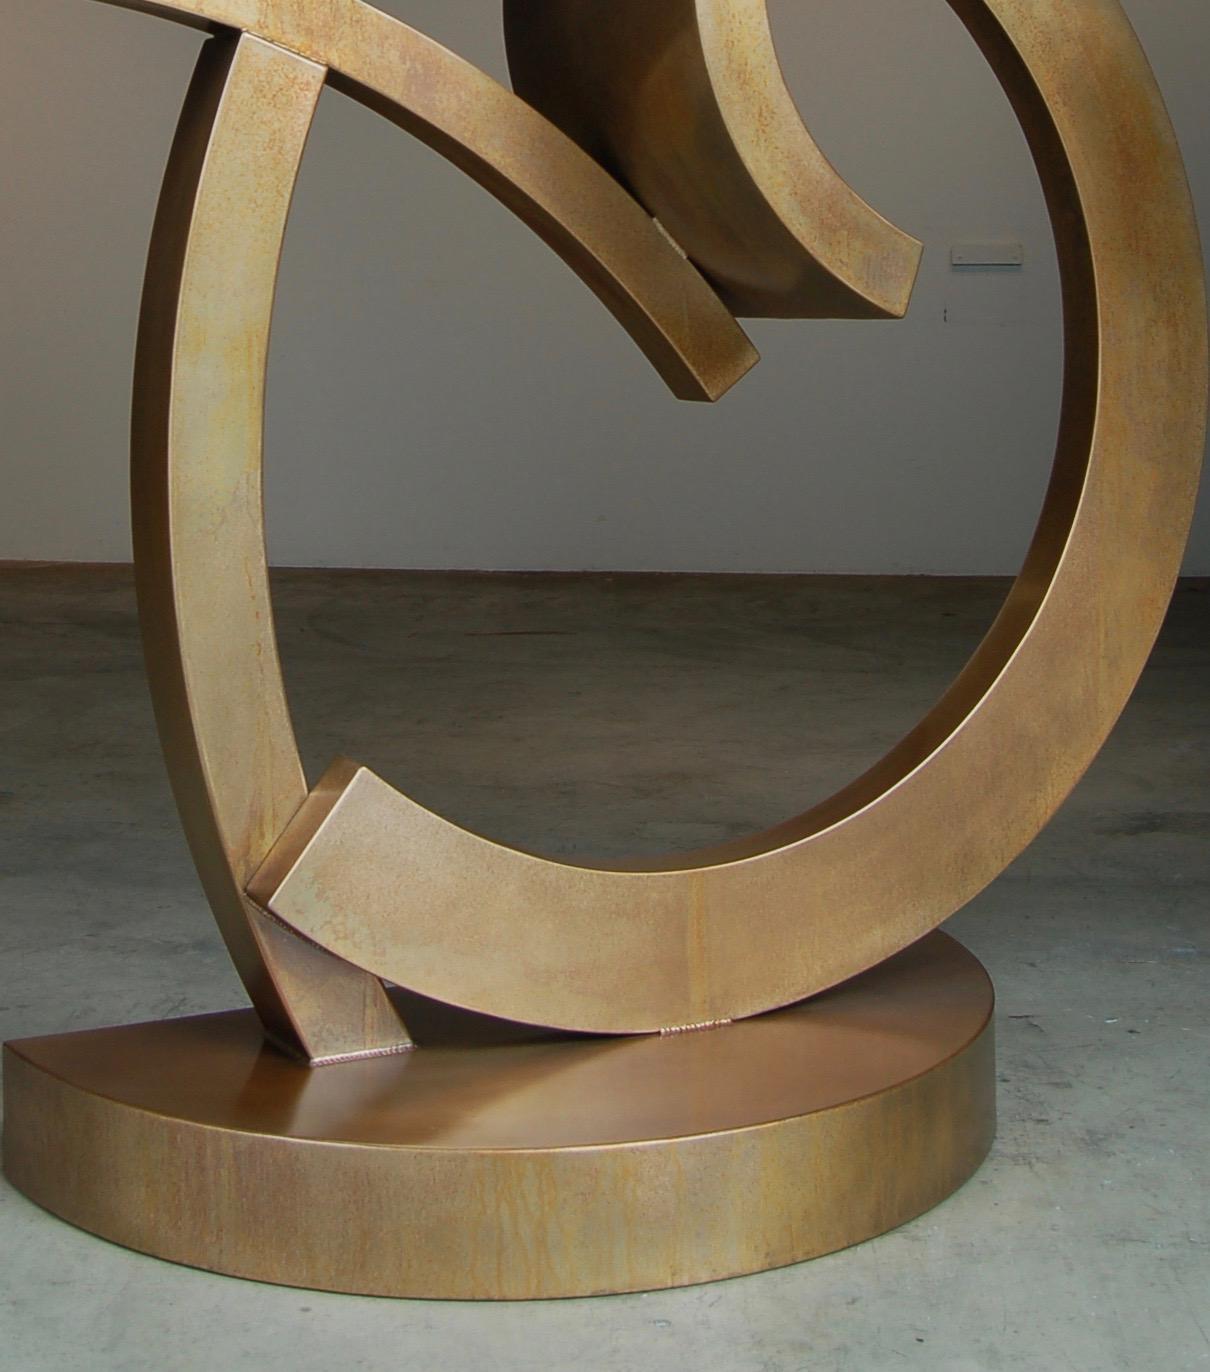 Pooja, sculpture by Guy Dill, abstract, contemporary, bronze sculpture, indoor, outdoor

Contact us with expected delivery times.

Abstract sculptor GUY DILL is well-known and in such collections as the Museum of Modern Art, the Guggenheim and